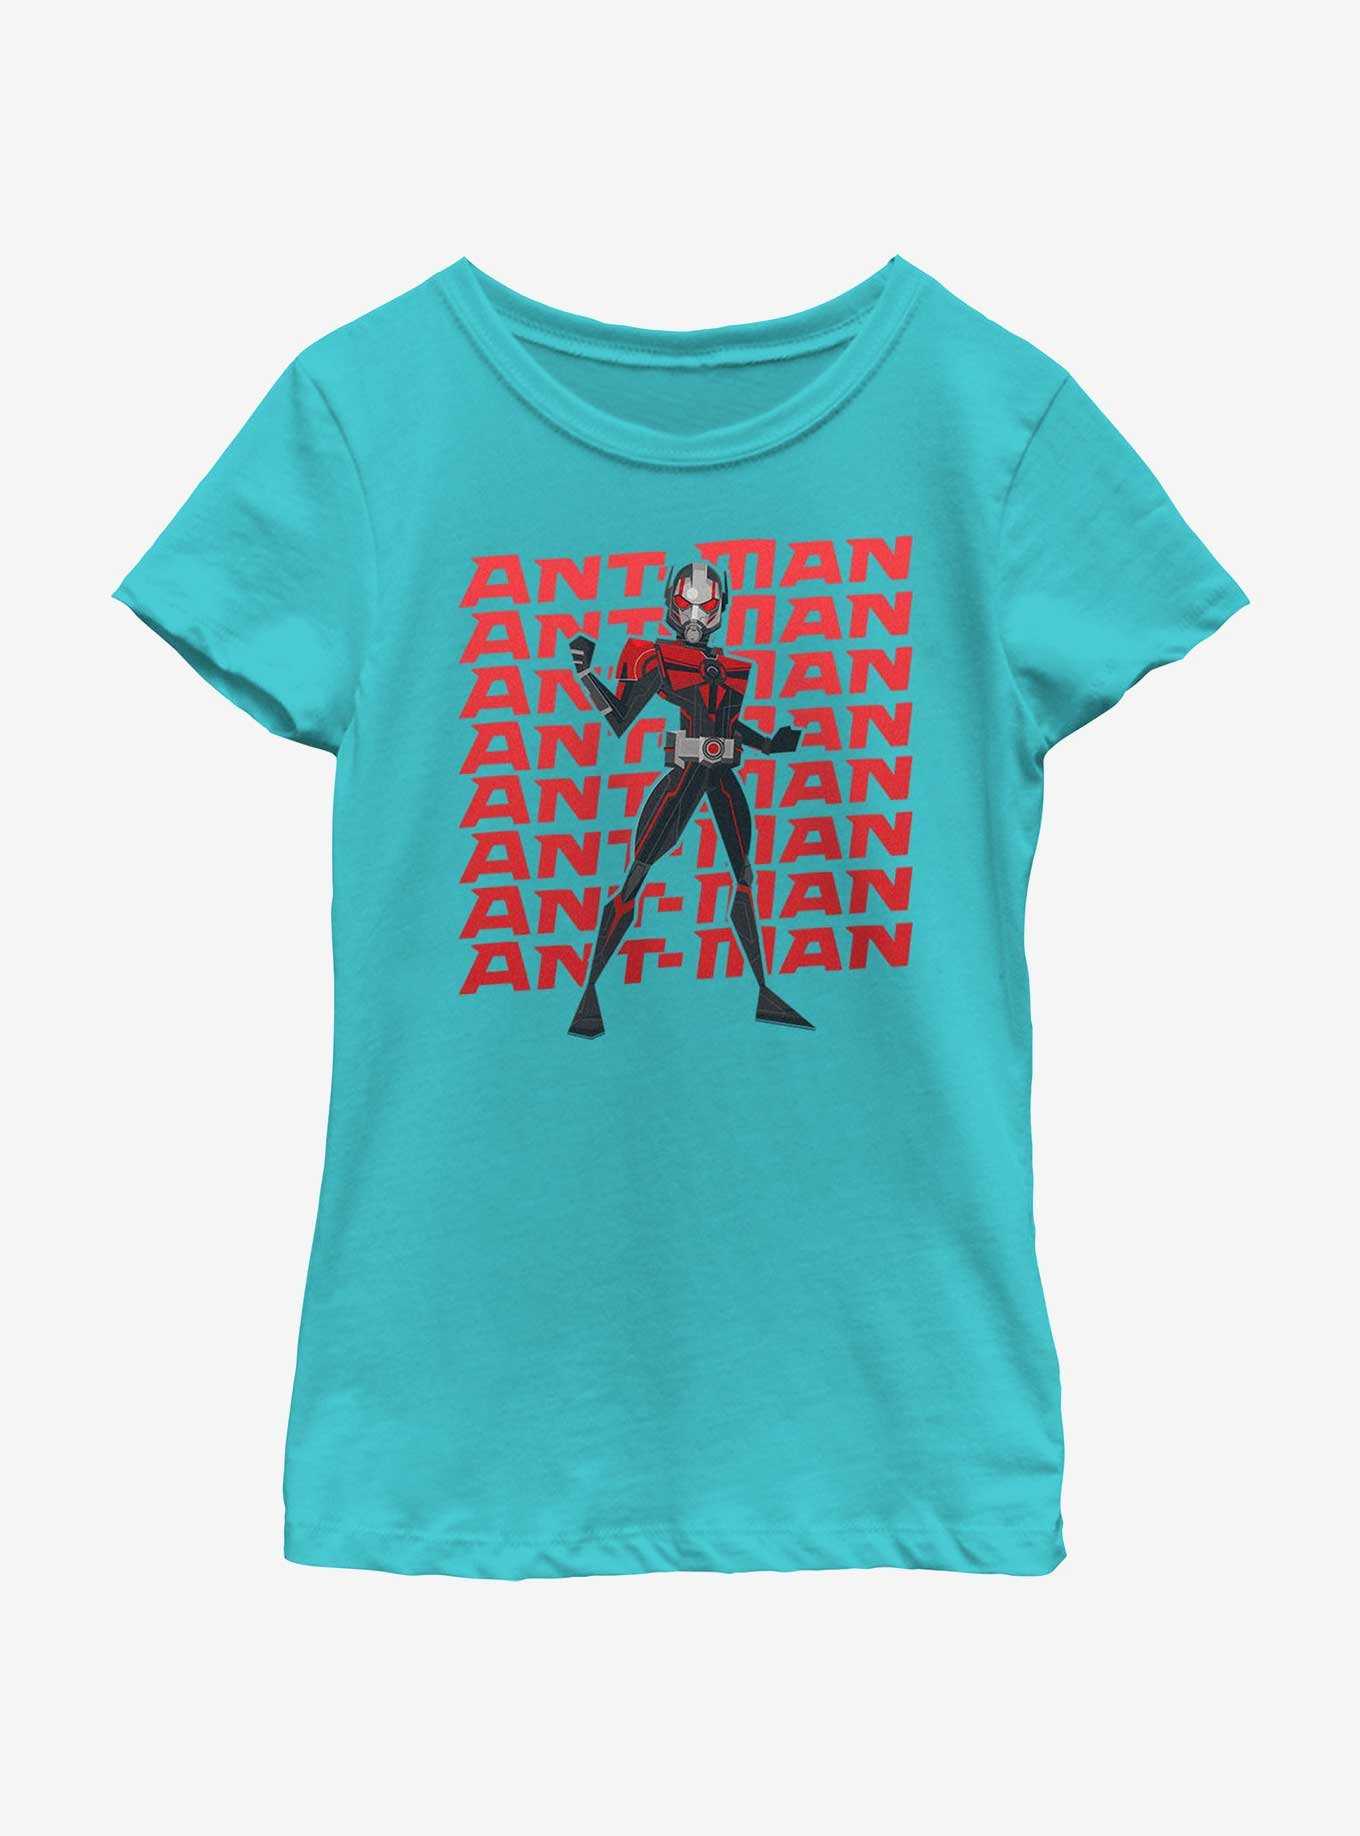 Marvel Ant-Man and the Wasp: Quantumania Action Pose Youth Girls T-Shirt, , hi-res